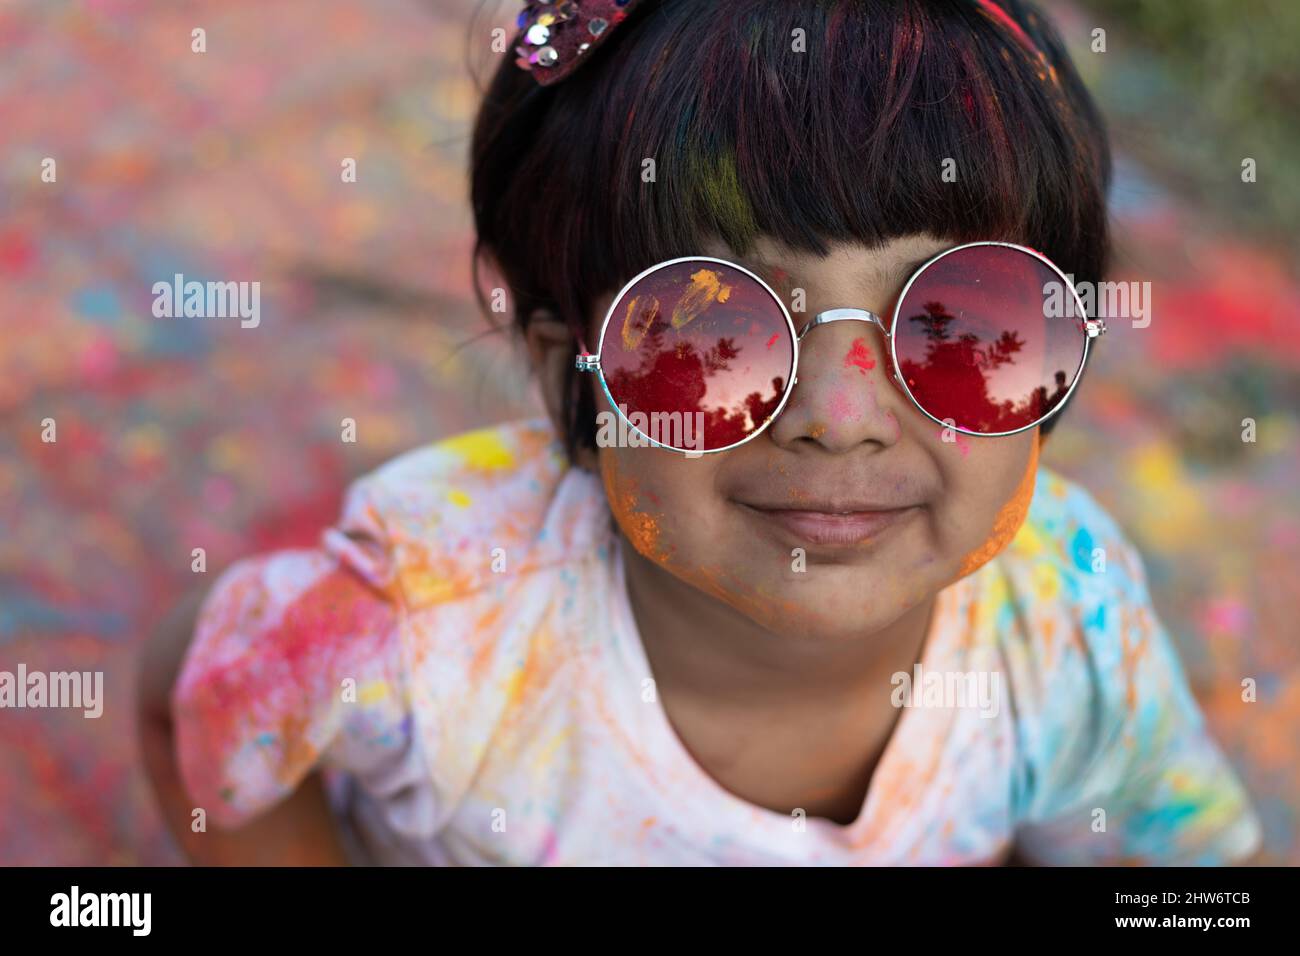 Indian Festive Theme - Happy Asian Kid Baby Girl Having Fun With Non Toxic Herbal Holi Color Powder Called Gulal Or Abir Rang Abeer Stock Photo